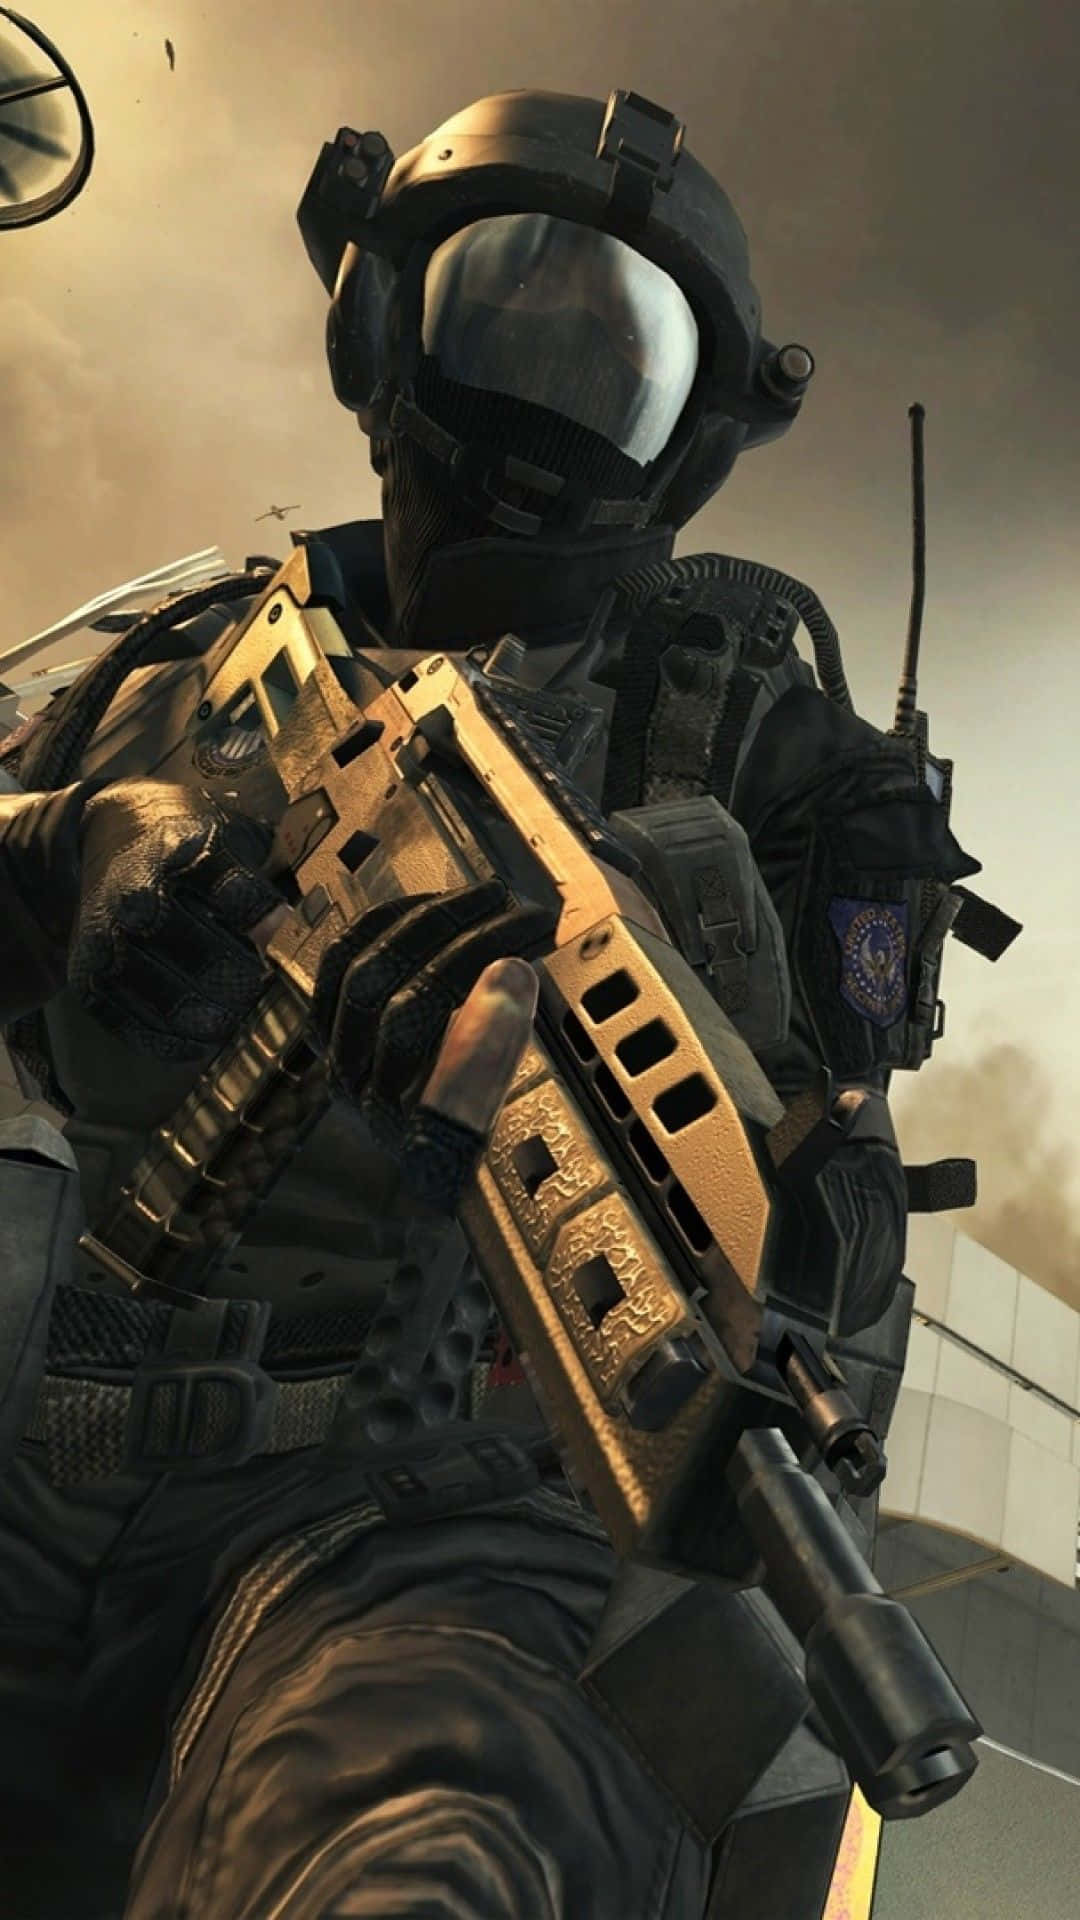 Intense Call of Duty Action with Modern Weapons Wallpaper